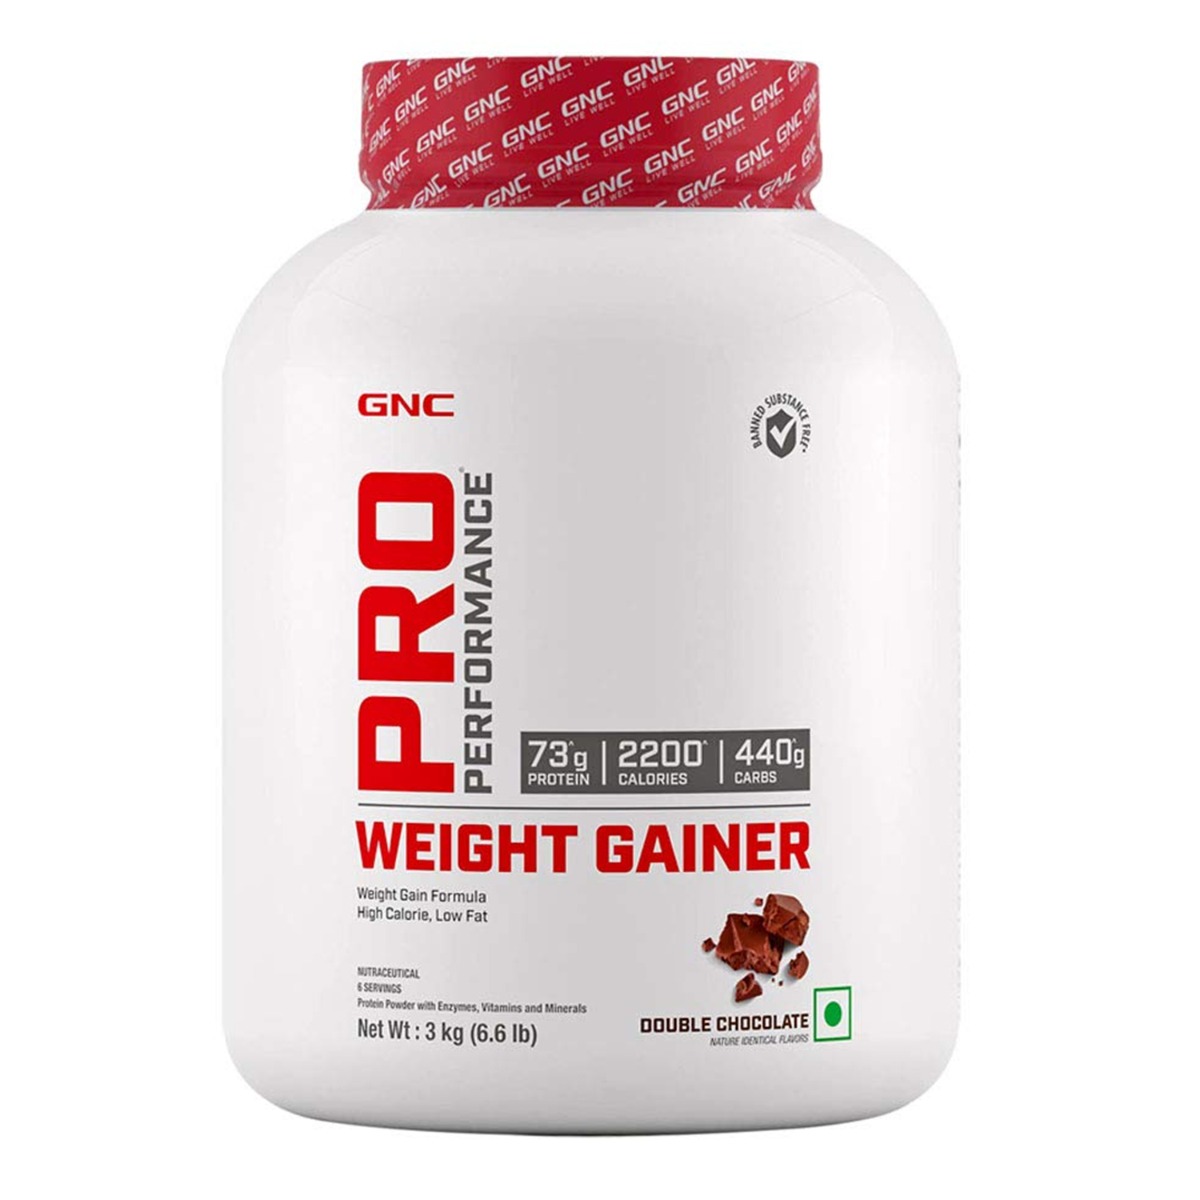 GNC Pro Performance Weight Gainer Powder - Double Chocolate, 3kg